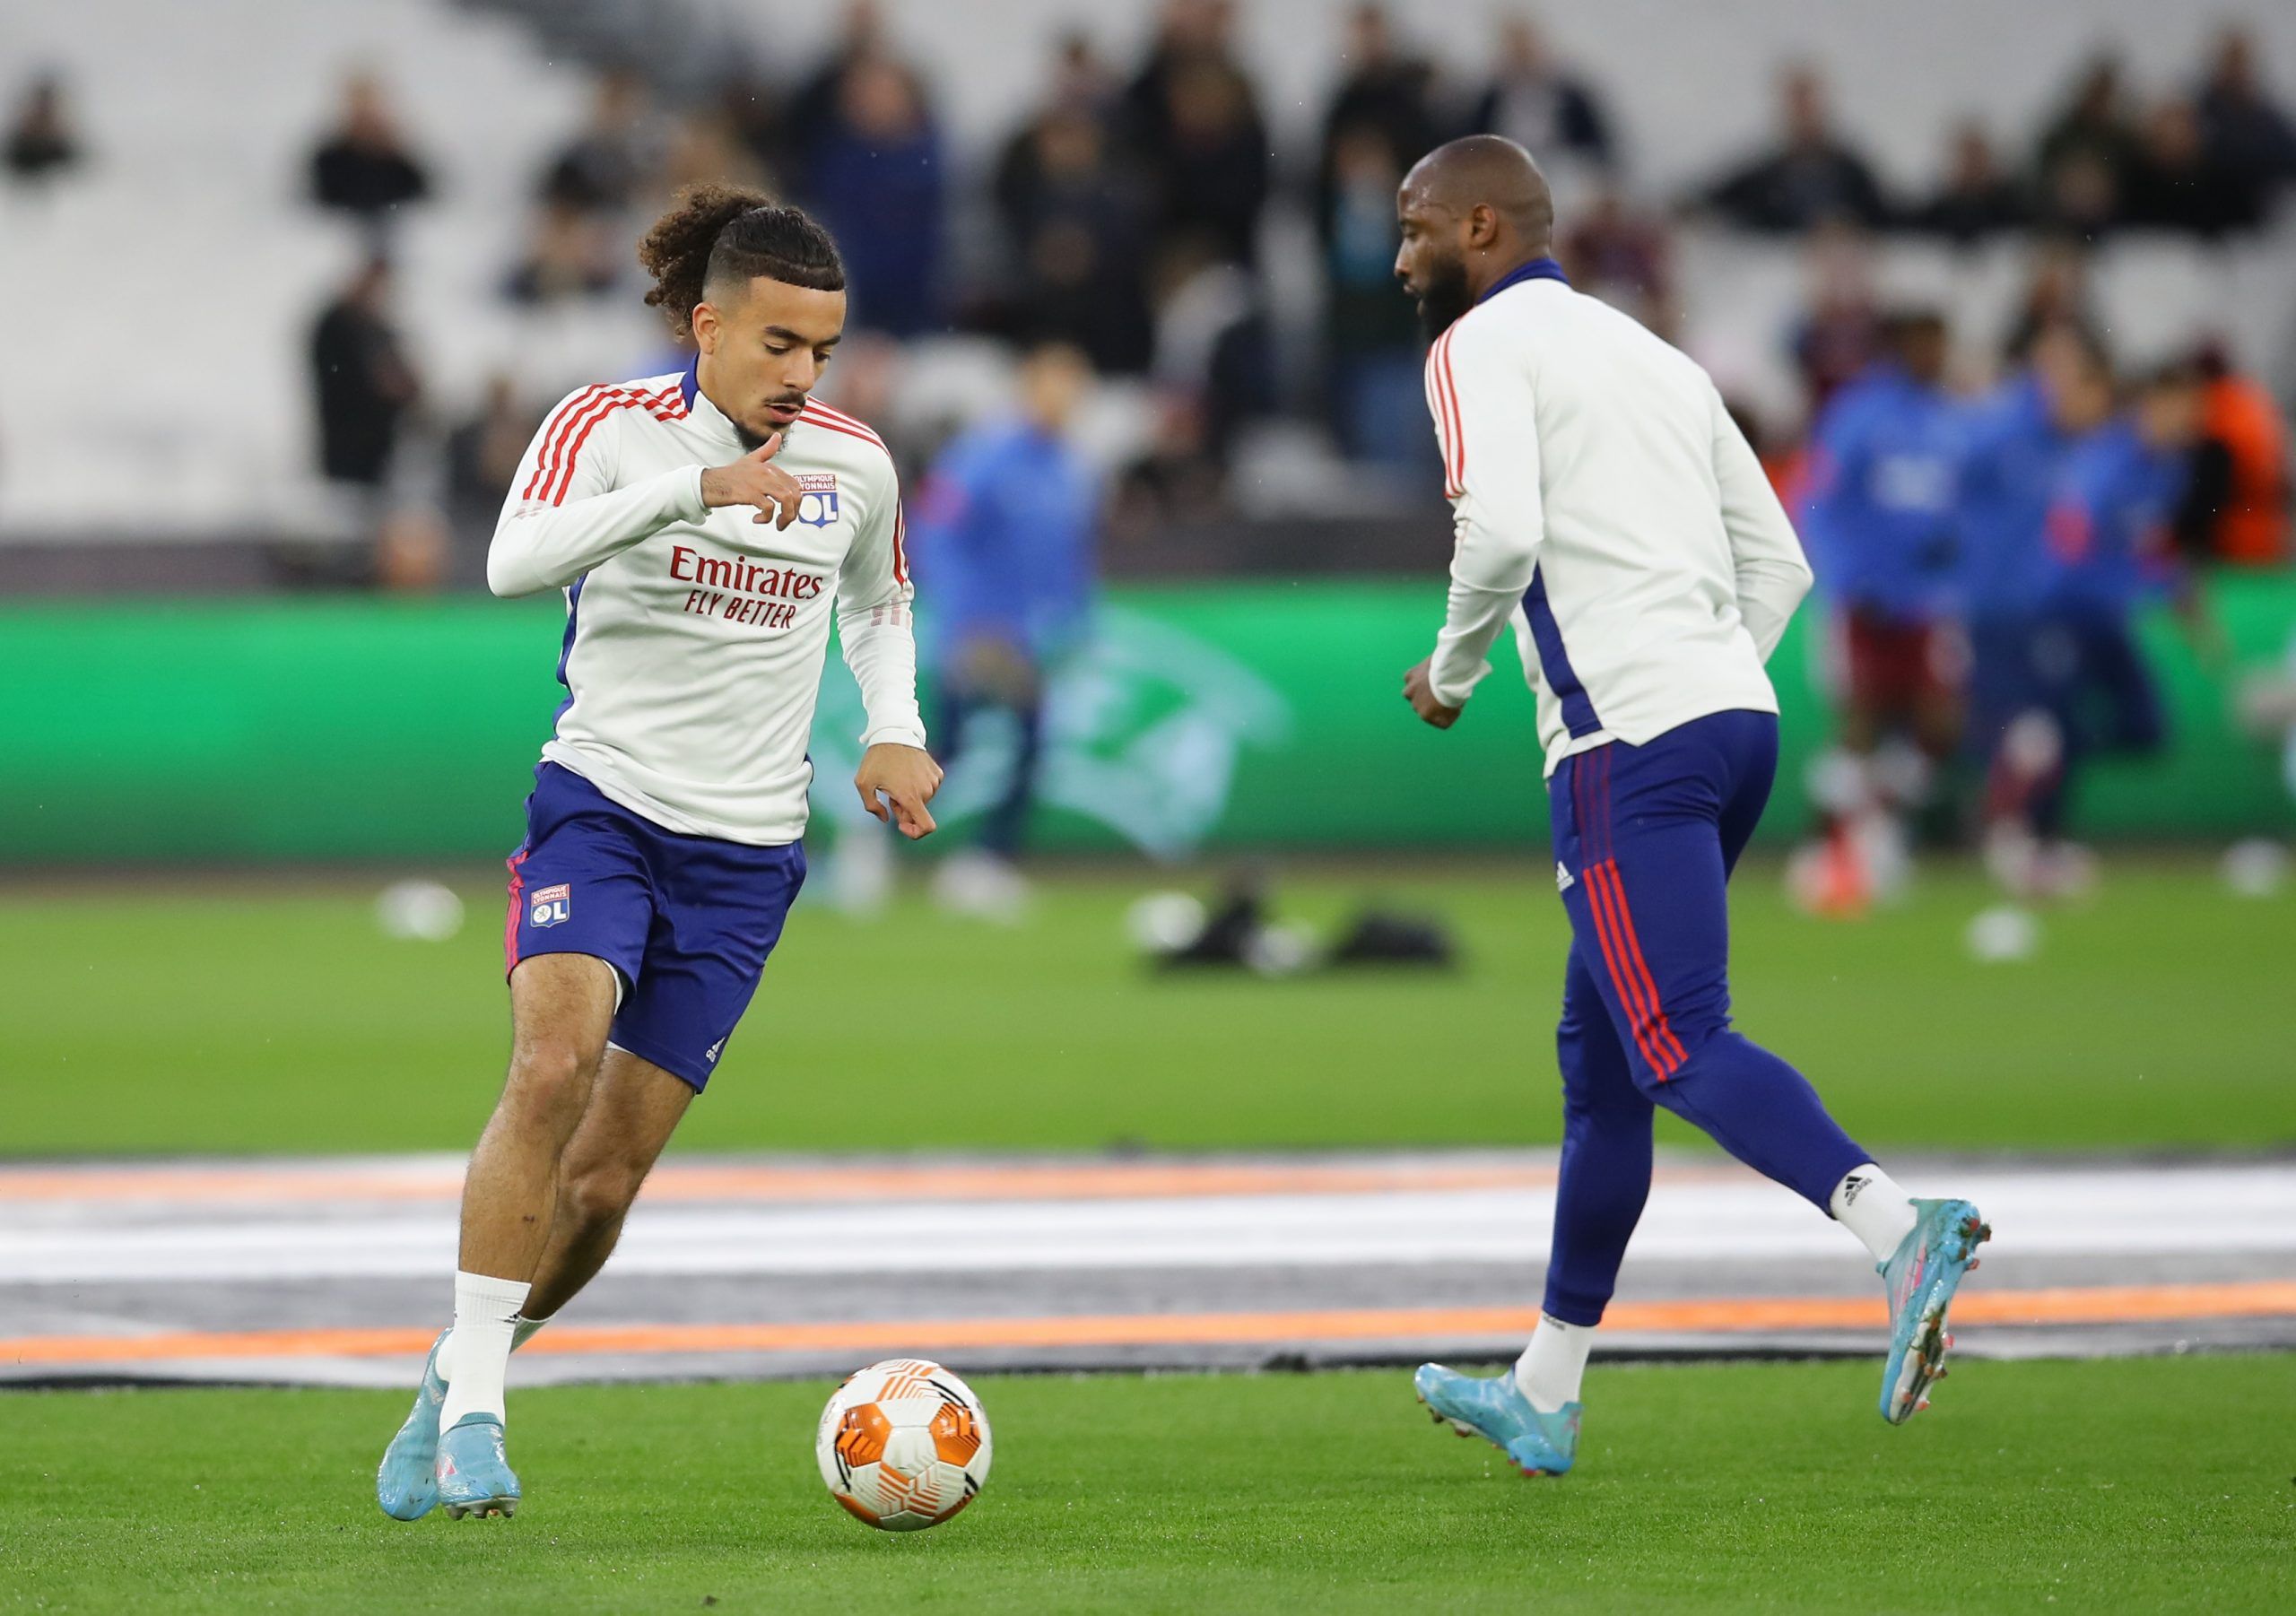 Soccer Football - Europa League - Quarter Final - First Leg - West Ham United v Olympique Lyonnais - London Stadium, London, Britain - April 7, 2022  Olympique Lyonnais' Malo Gusto during the warm up before the match REUTERS/David Klein